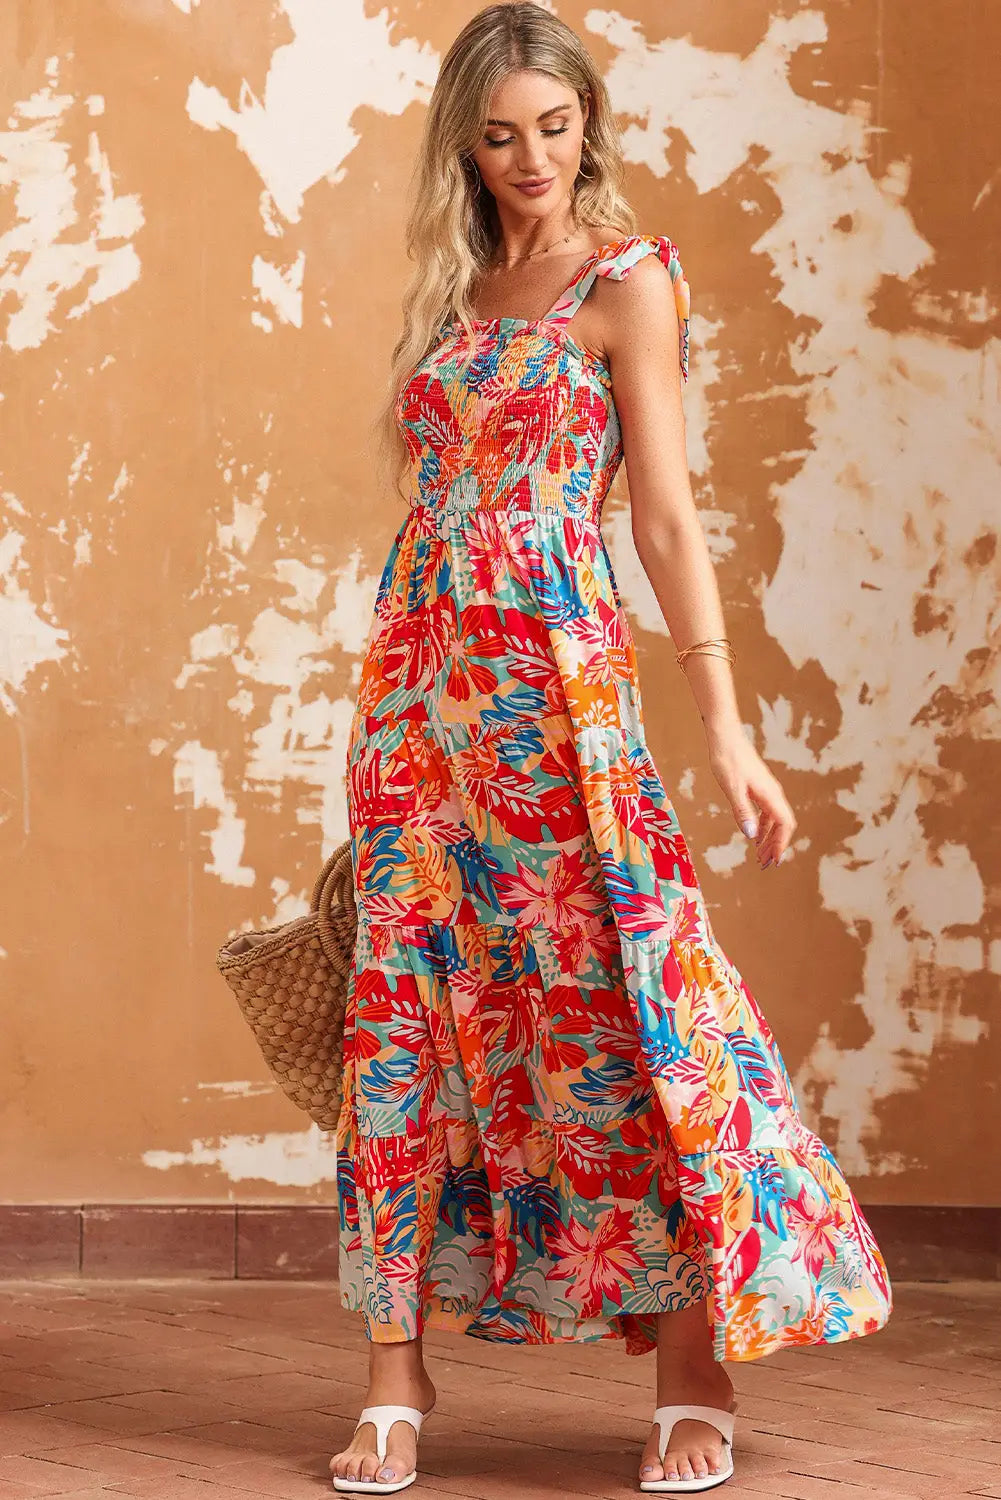 Multicolor vibrant tropical print smocked ruffle tiered maxi dress - dresses